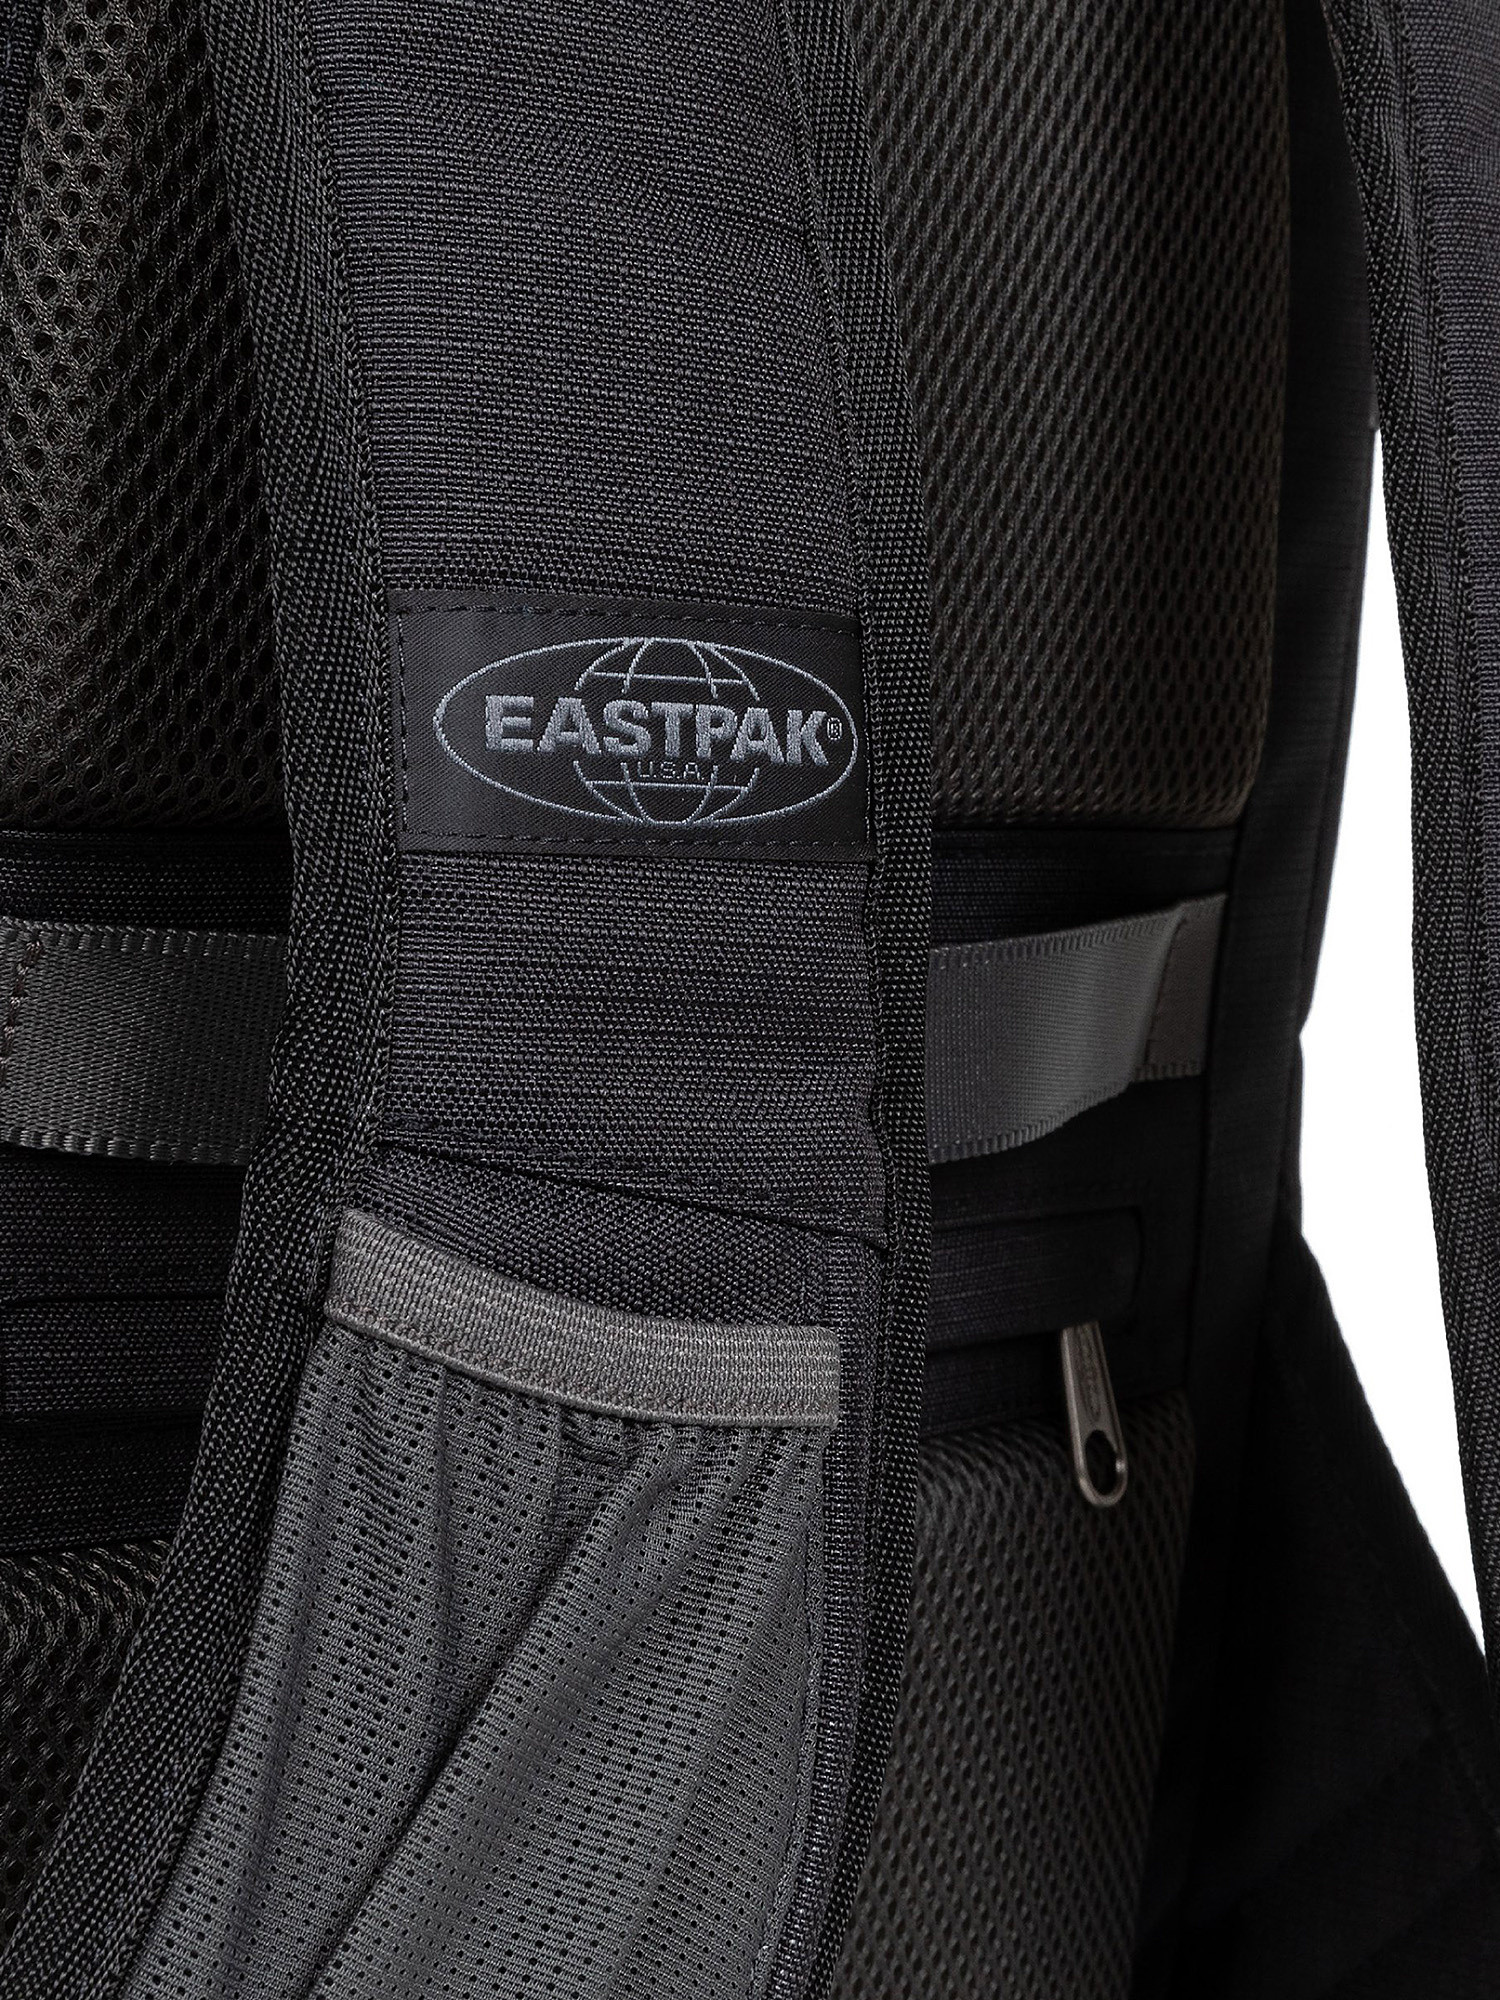 Eastpak - Zaino Out Safepack Out Black, Nero, large image number 6